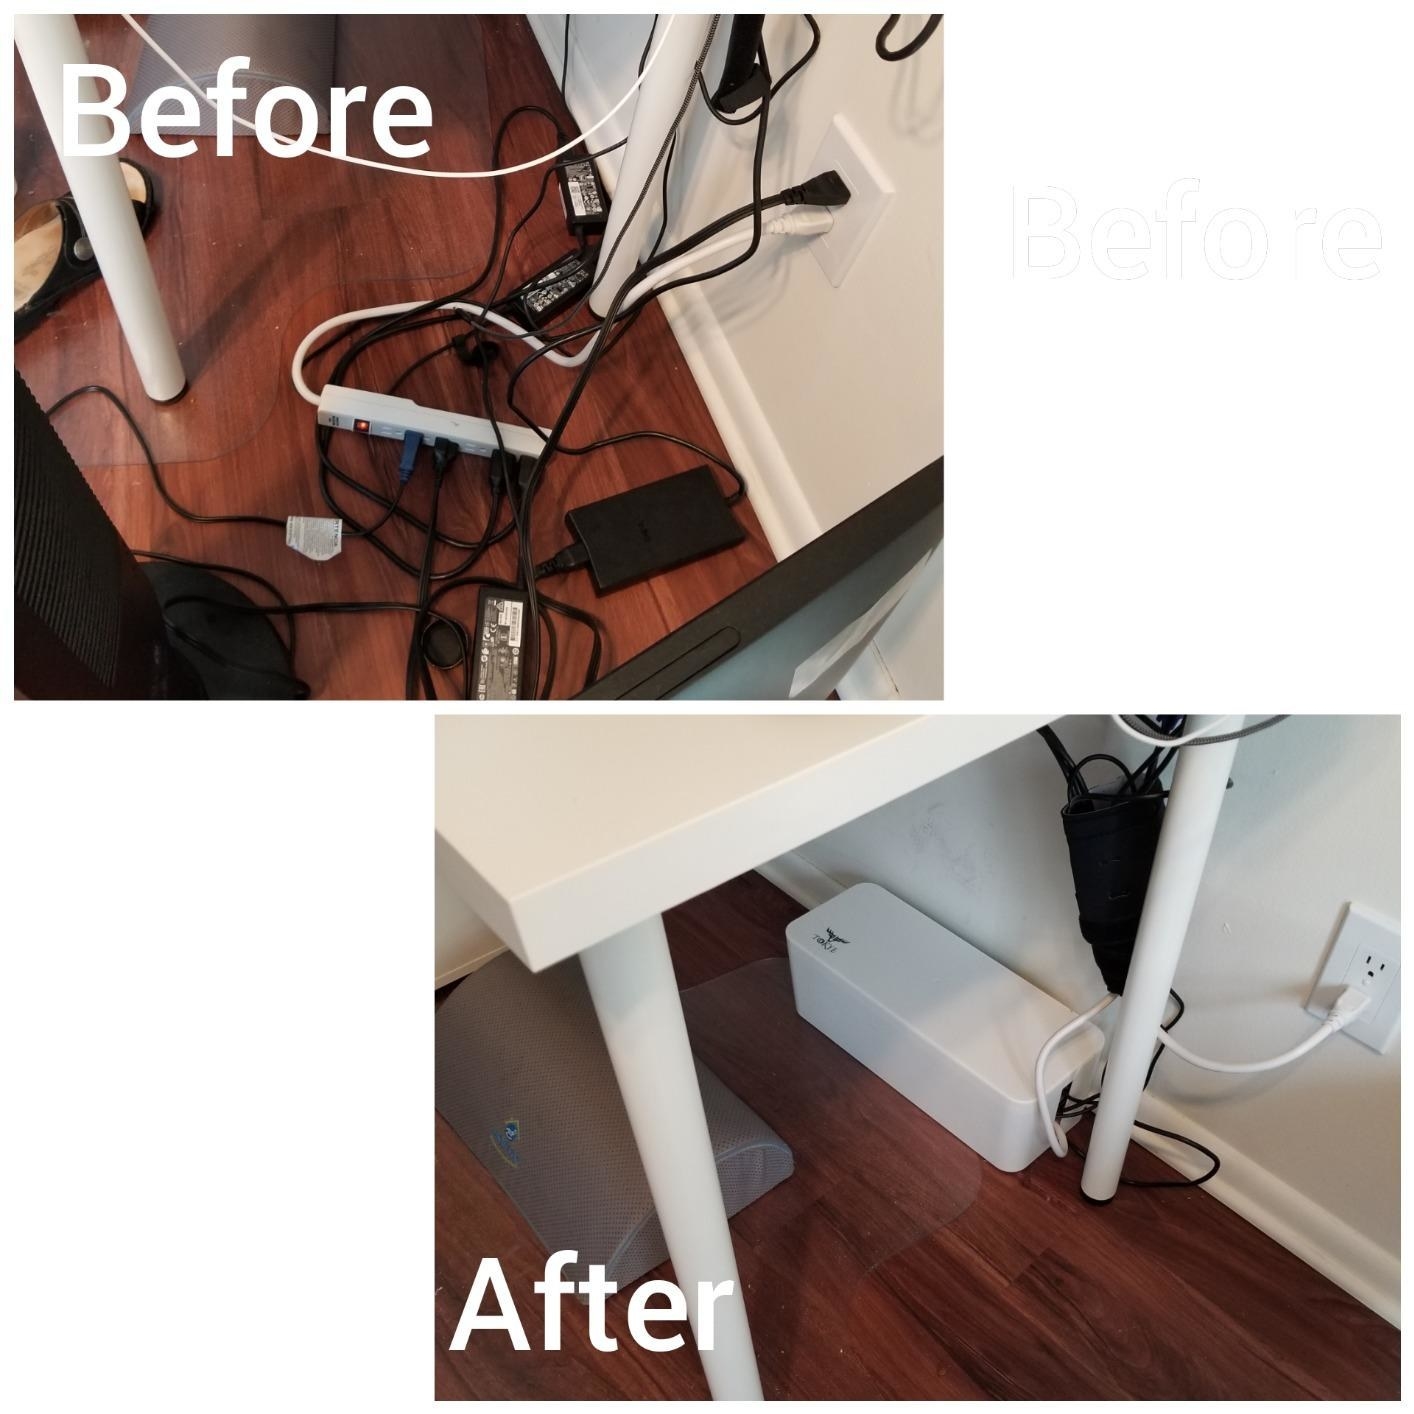 before photo of a mess of tangled cords plugged into a powerstrip and an outlet next to an after photo of a white rectangular box holding the powerstrip and cords and the area looks much neater